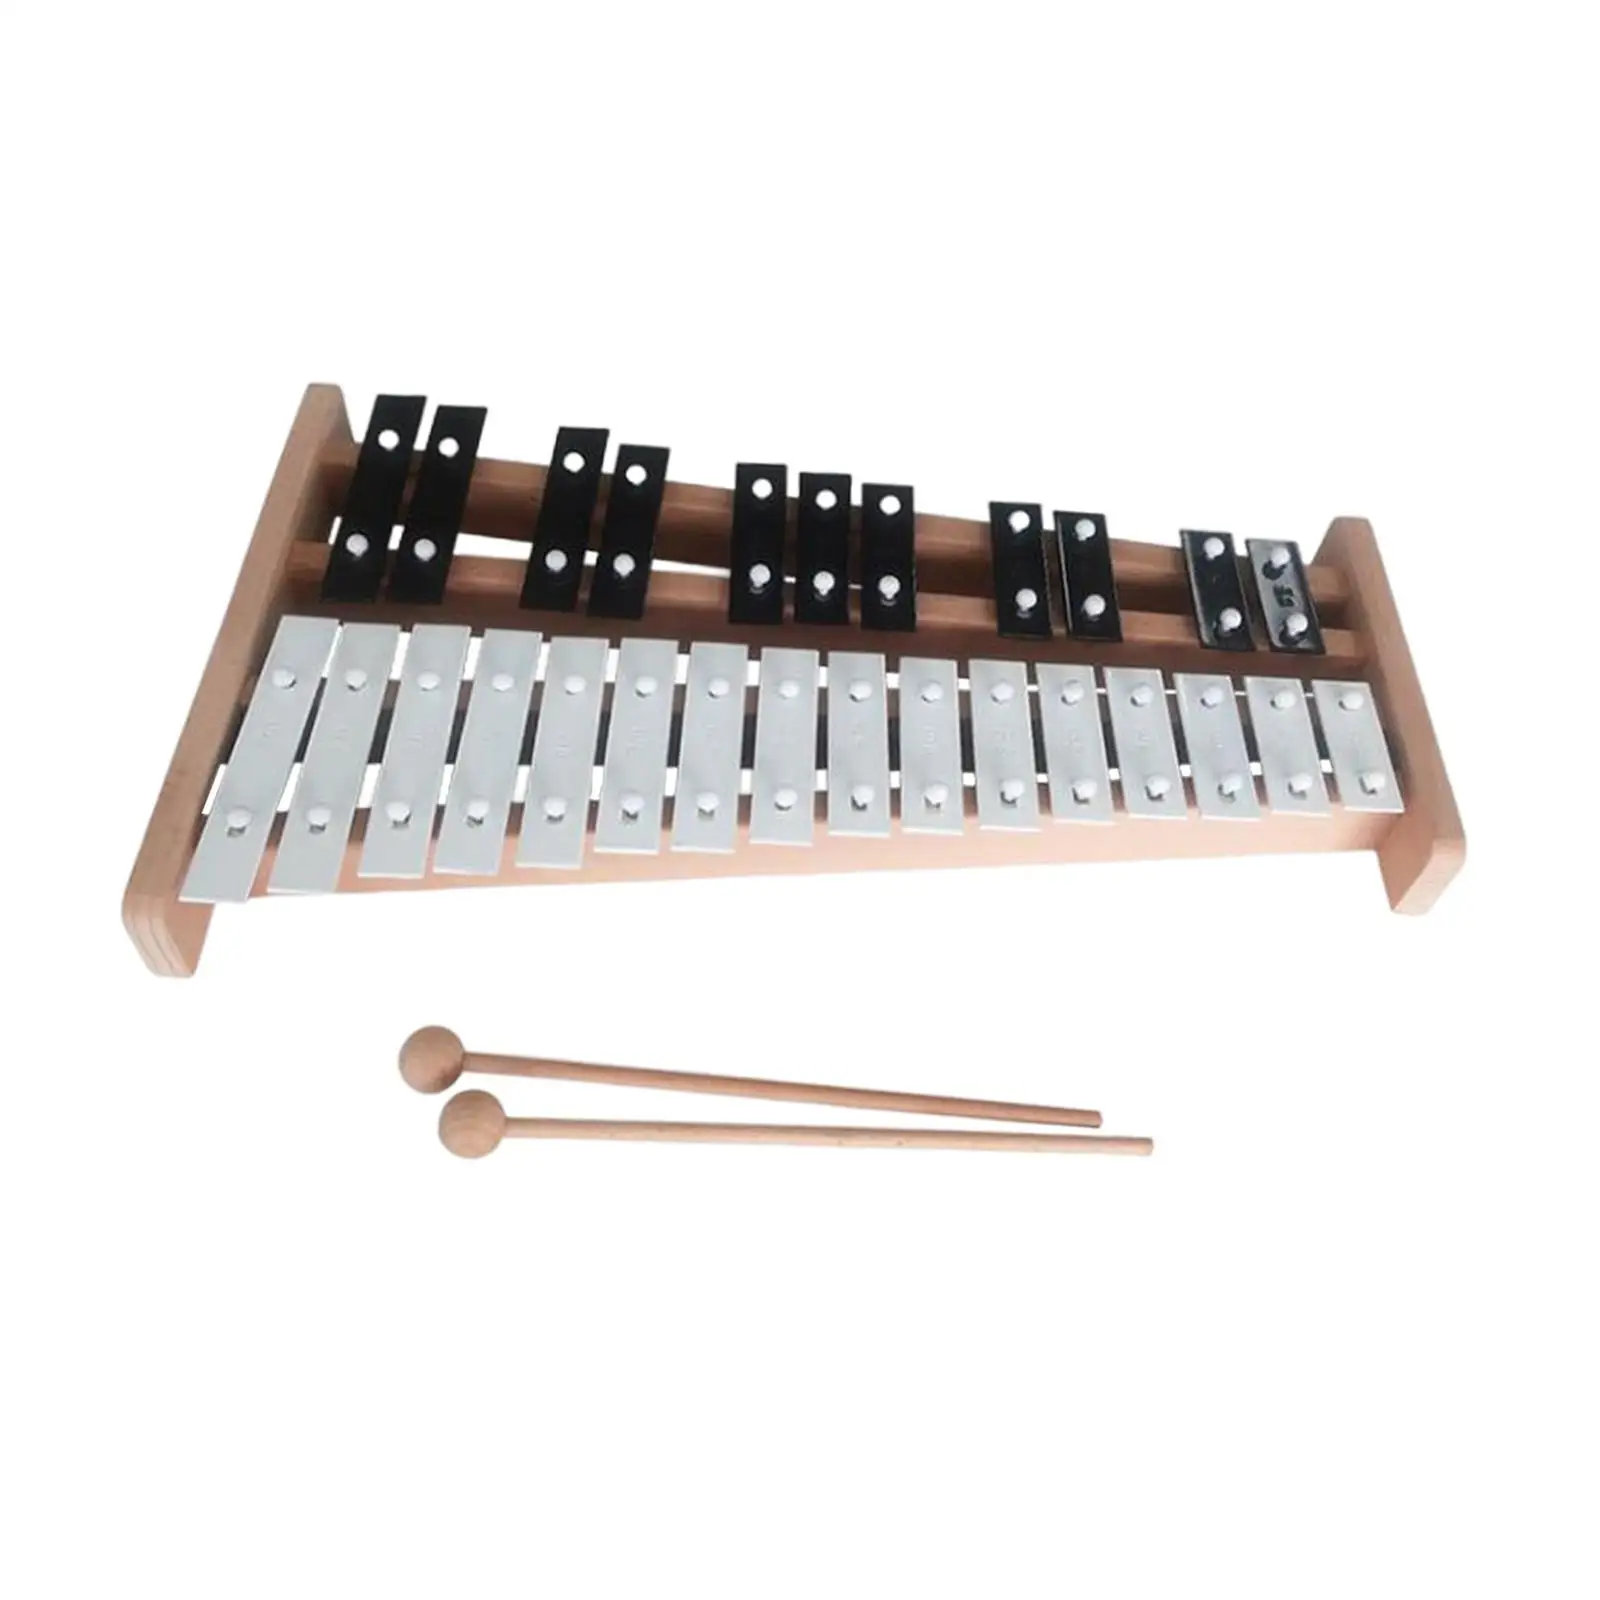 Glockenspiel with 27 notes, xylophone, educational percussion, compact,